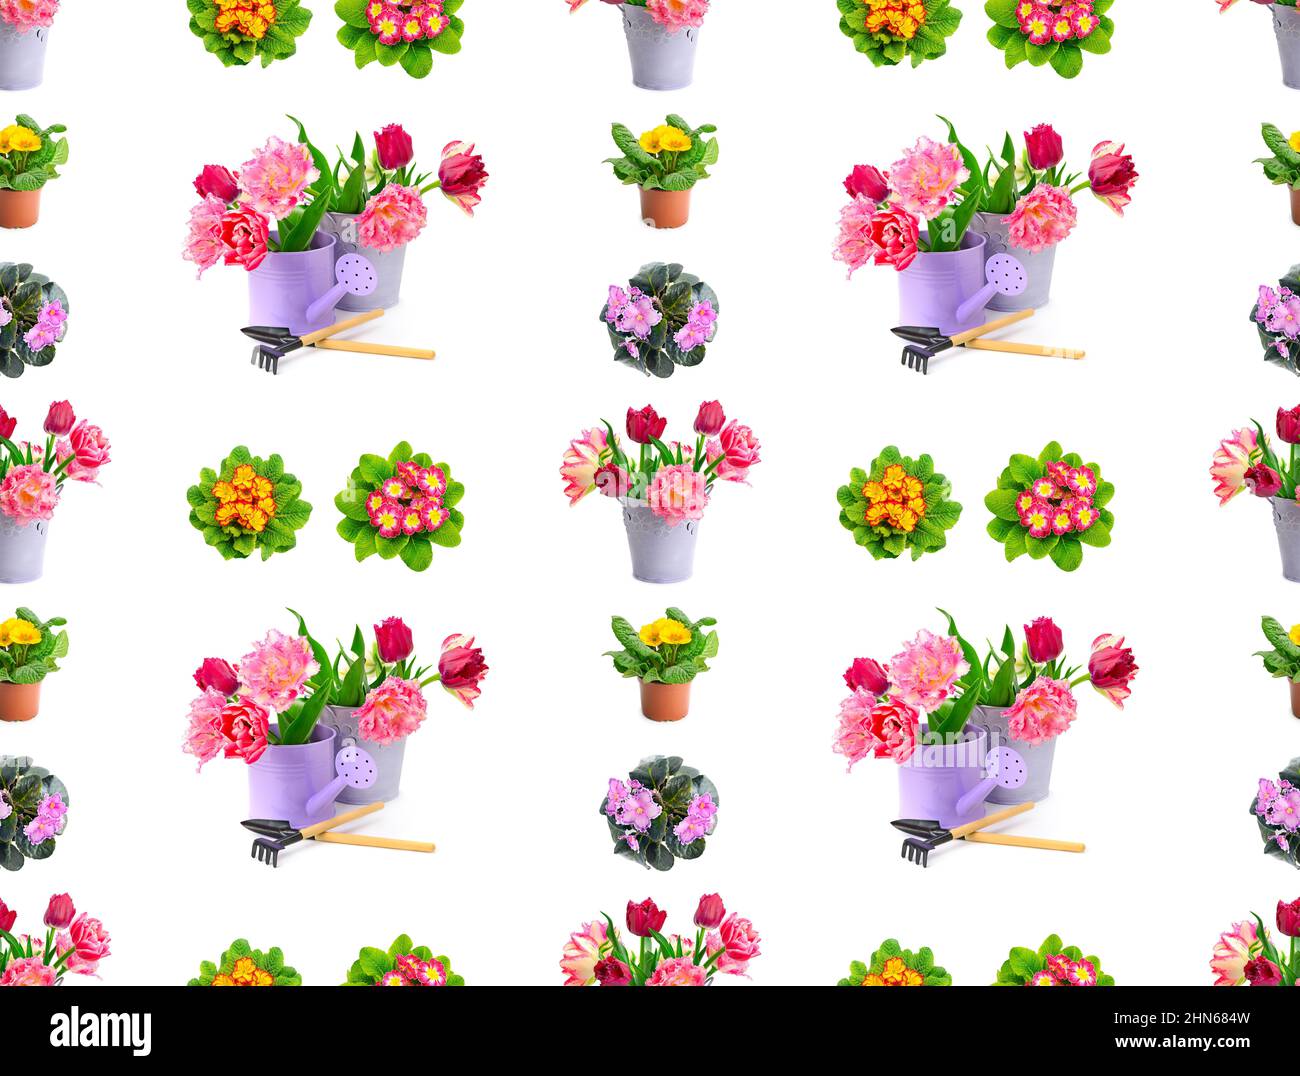 Large seamless pattern bright violets and tulips isolated on white background. Stock Photo